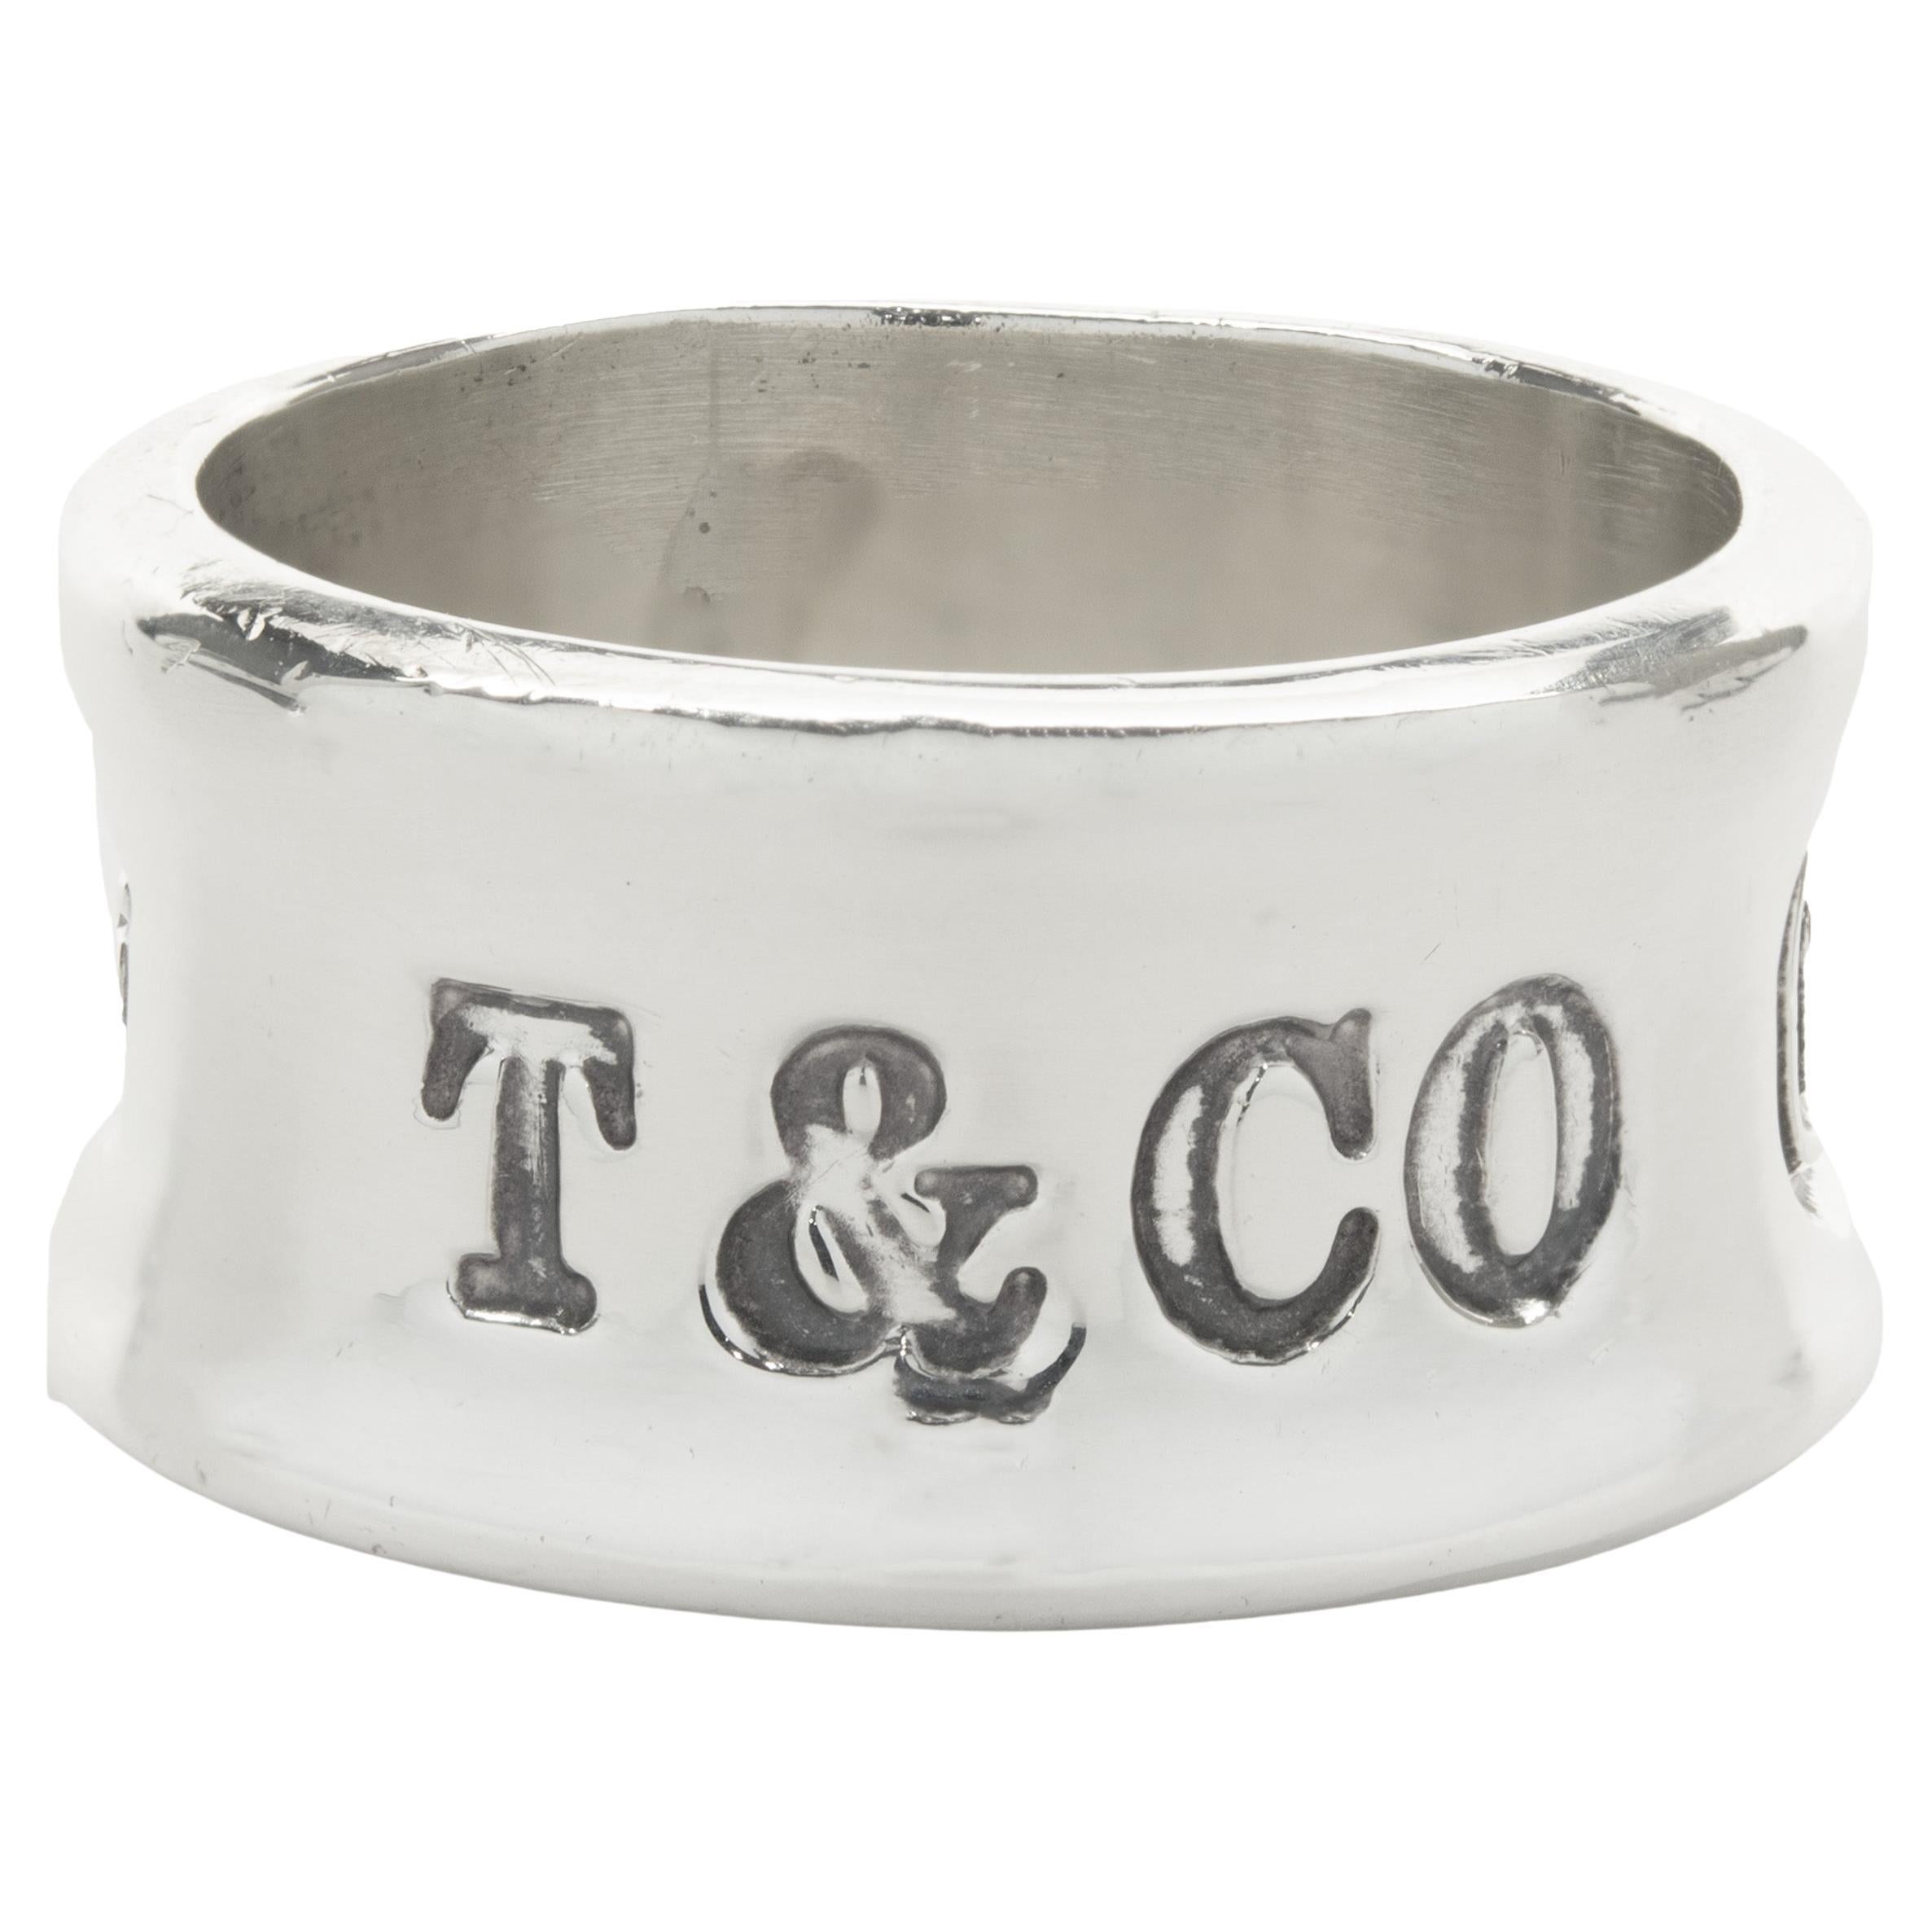 Tiffany & Co. Sterling Silver 1837 Ring